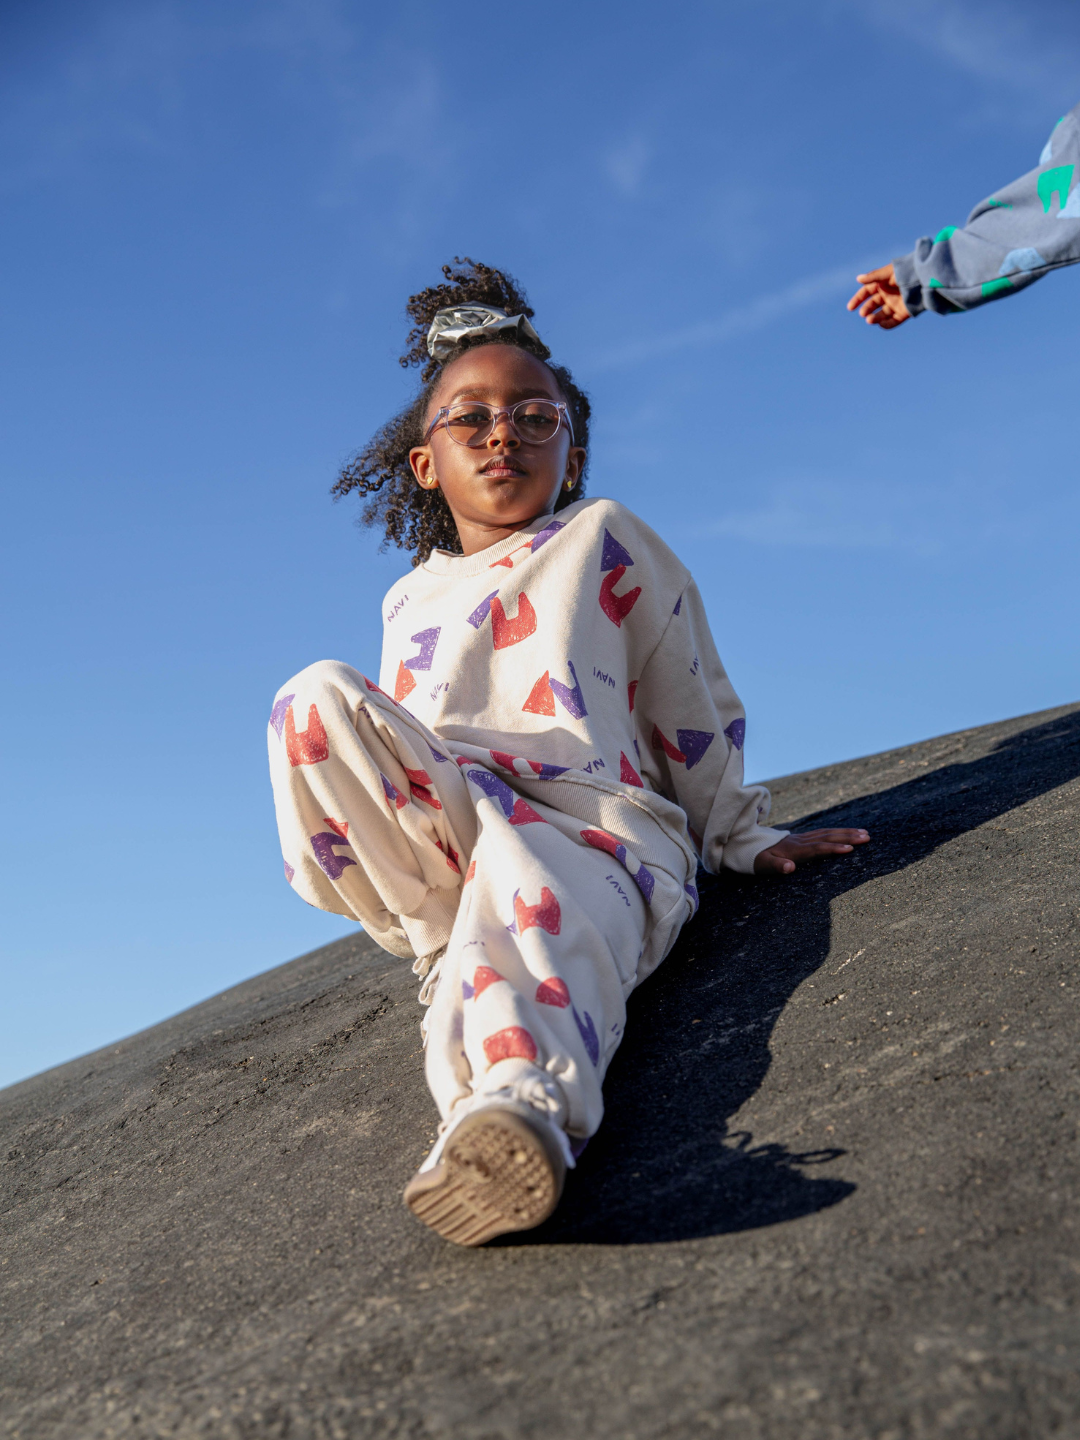 Child wearing beige sweatpants with an all over pattern of red and purple shapes and the brand name Navi, with matching crewneck sweatshirt. She sits on a concrete hill with blue sky above.